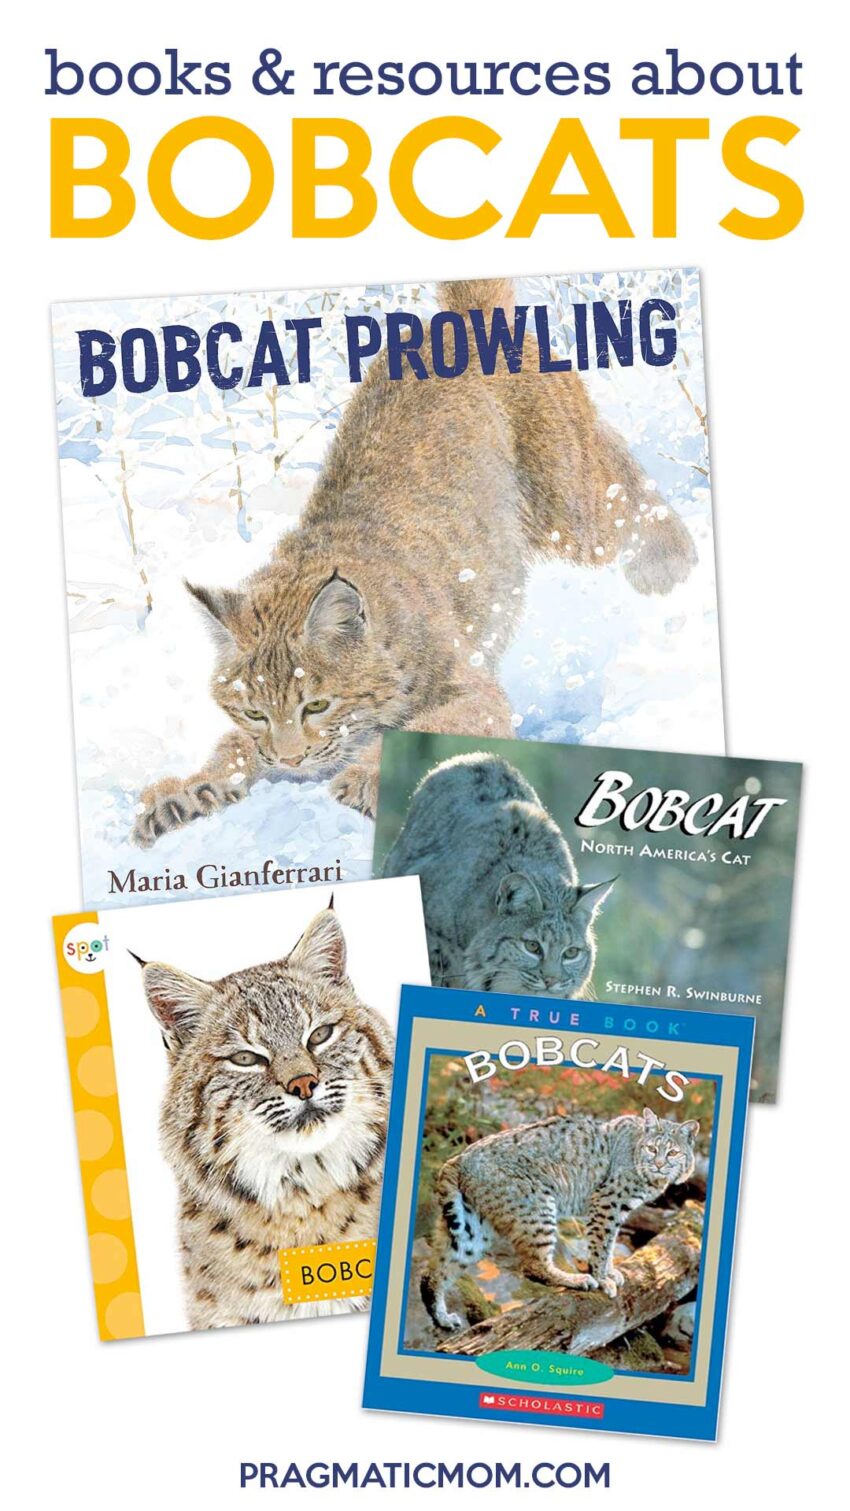 Celebrating Prowling Bobcats with Books, Resources & 25 Book GIVEAWAY!